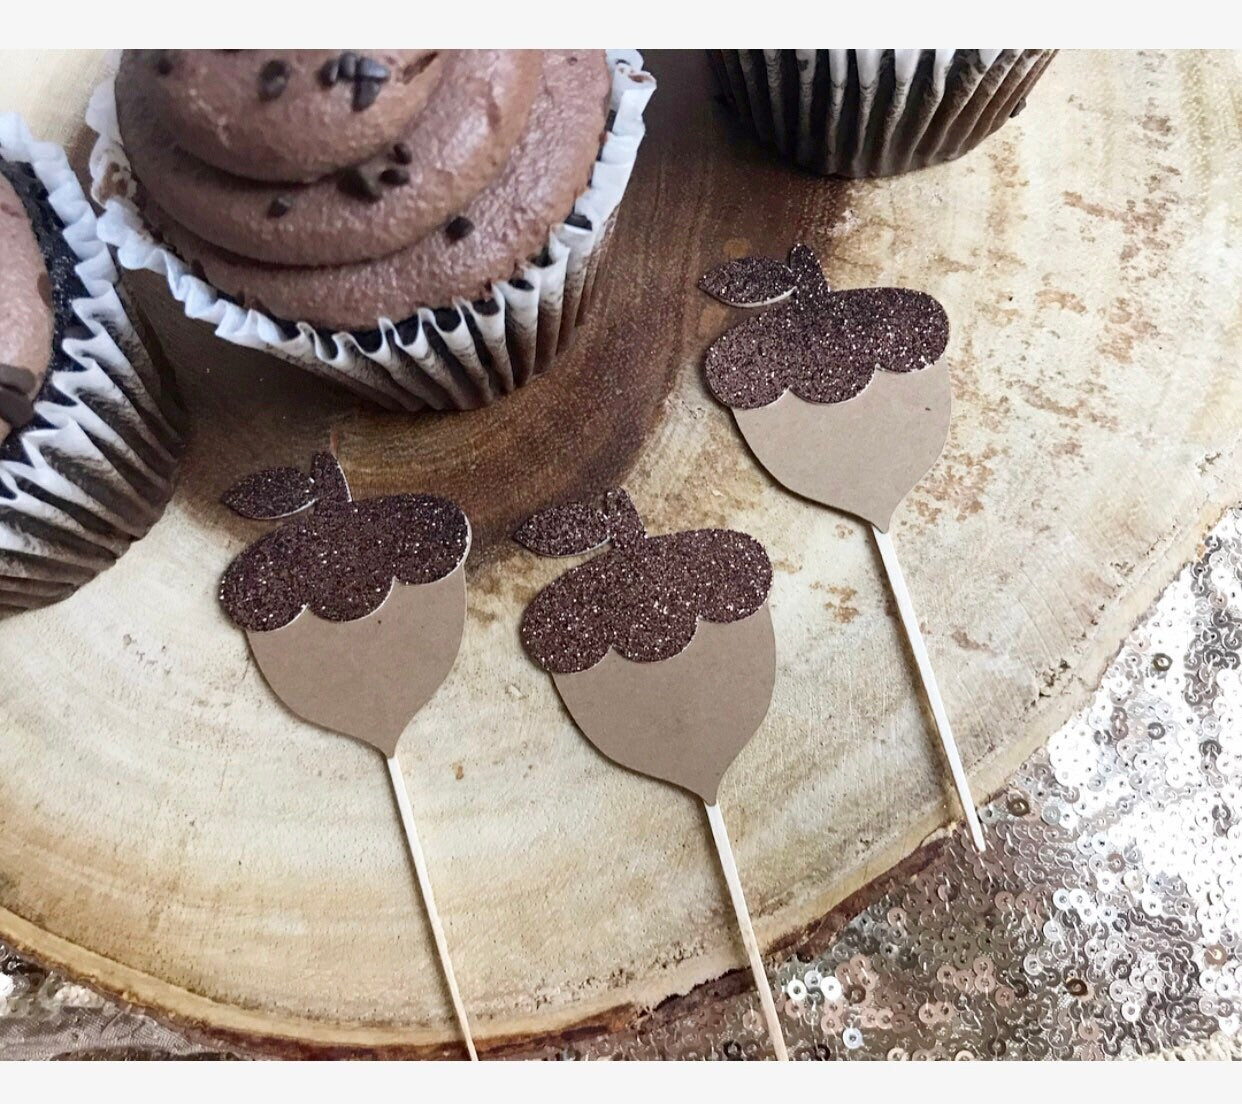 ACORN CUPCAKE TOPPERS